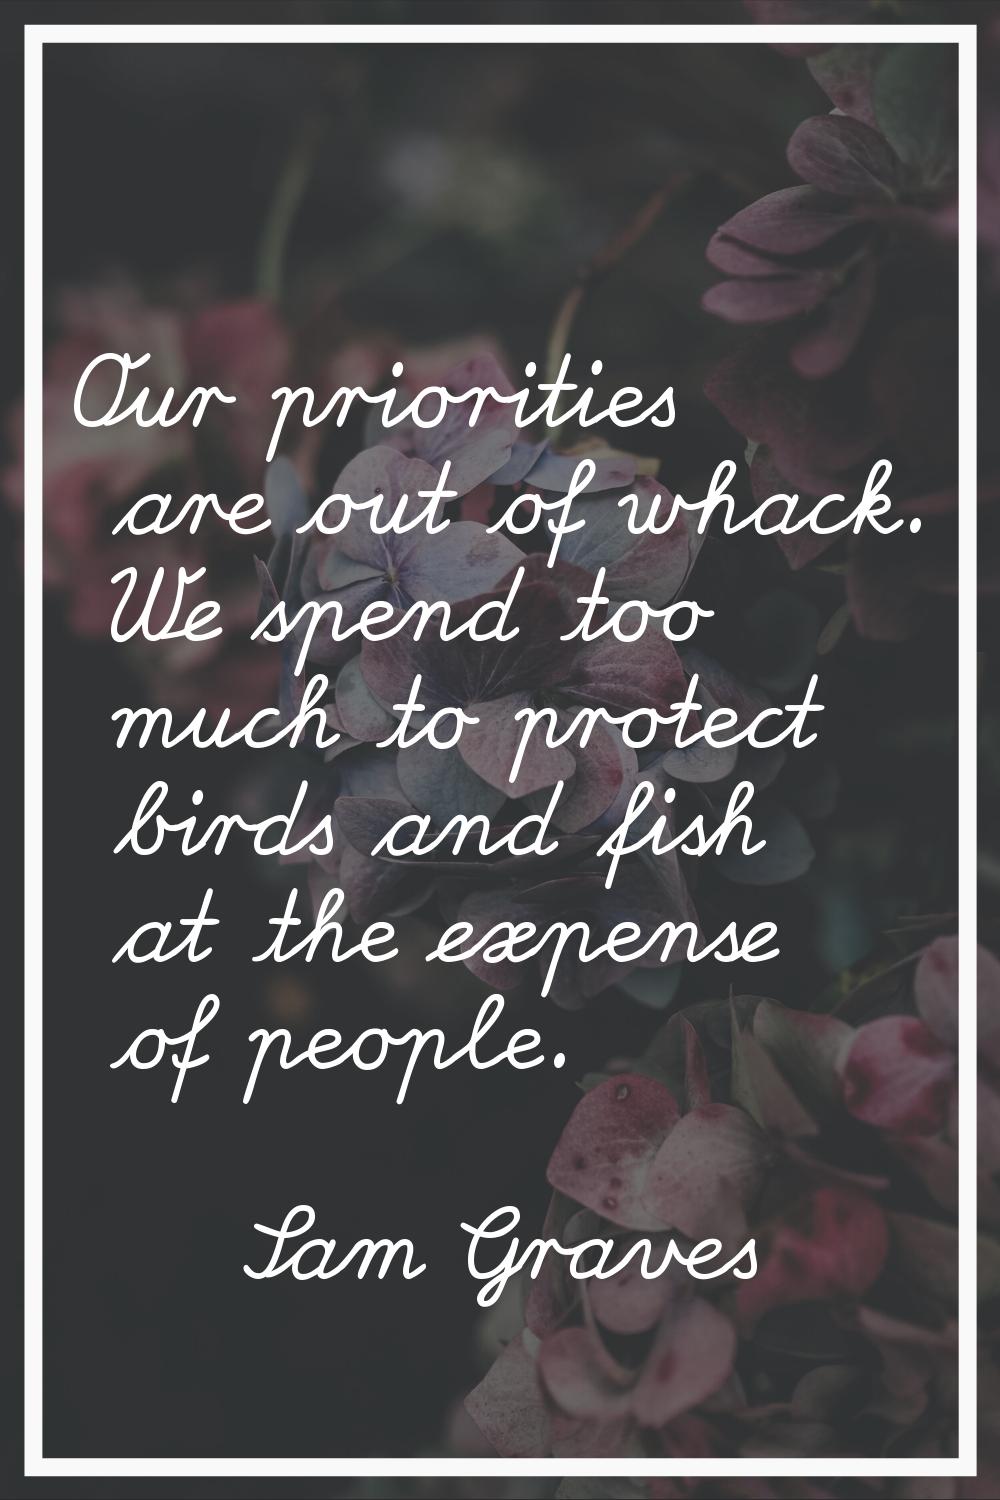 Our priorities are out of whack. We spend too much to protect birds and fish at the expense of peop